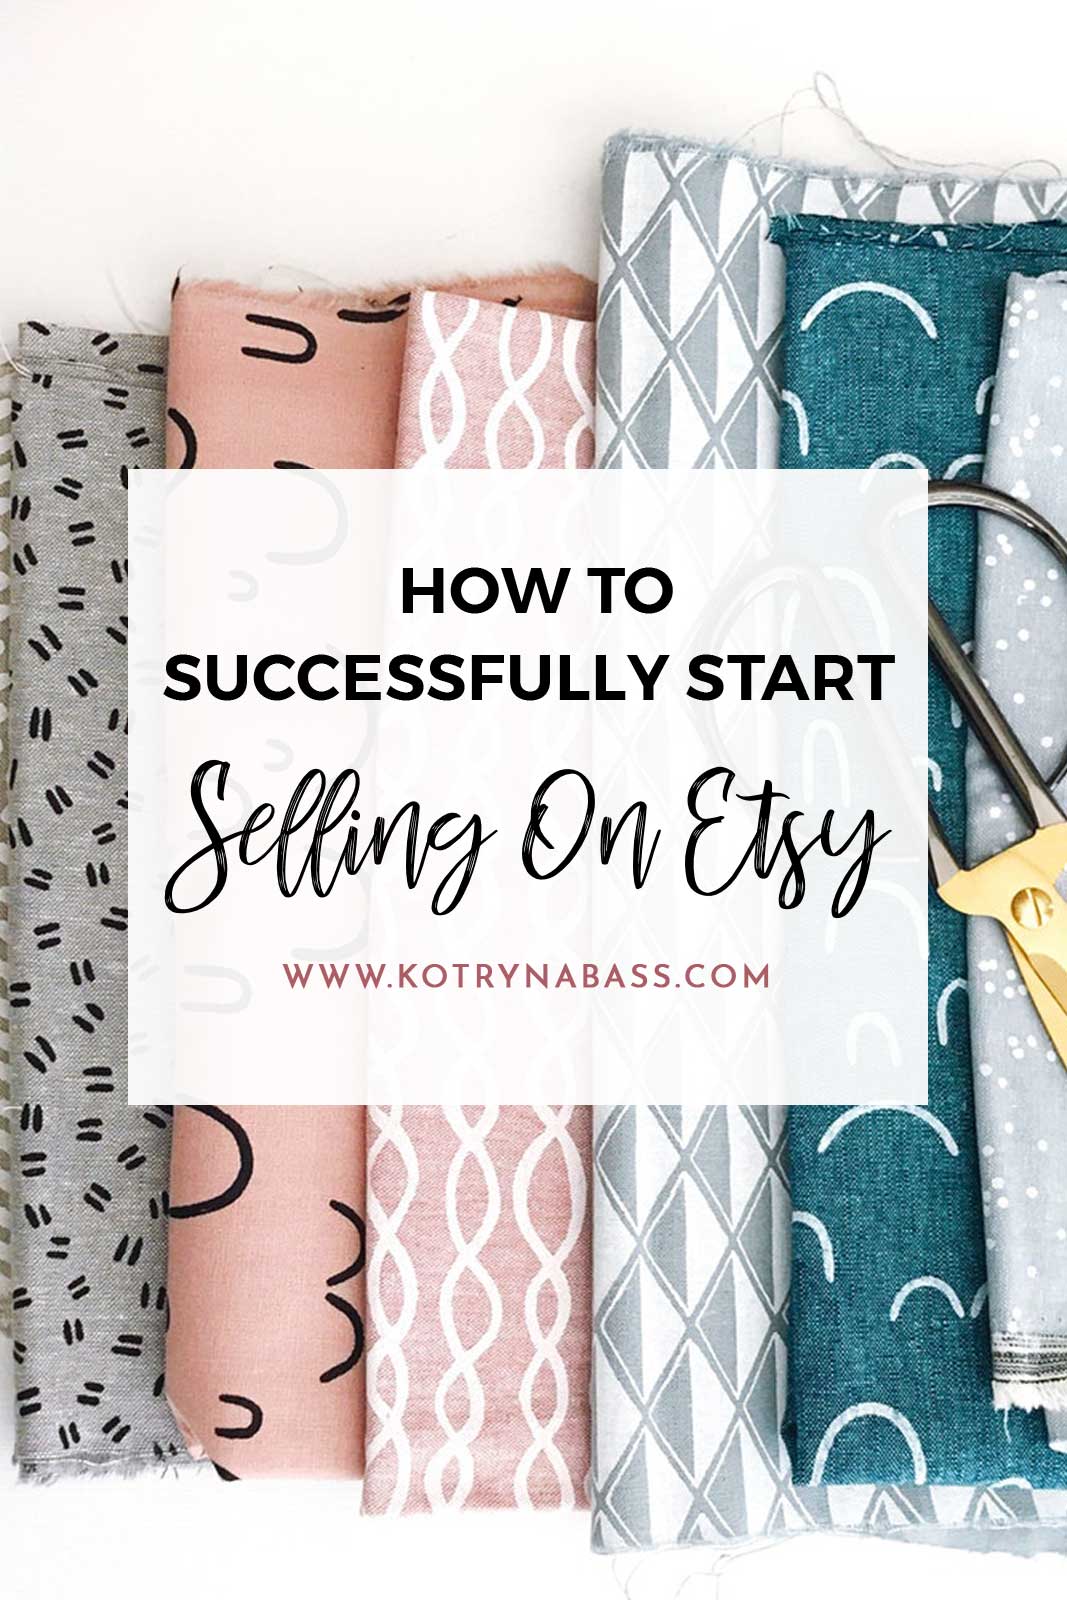 Many of you have asked about my Etsy strategies and in this post, I decided to share some of the things you should keep in mind if you want to lunch a successful Etsy shop. Let's get to it!